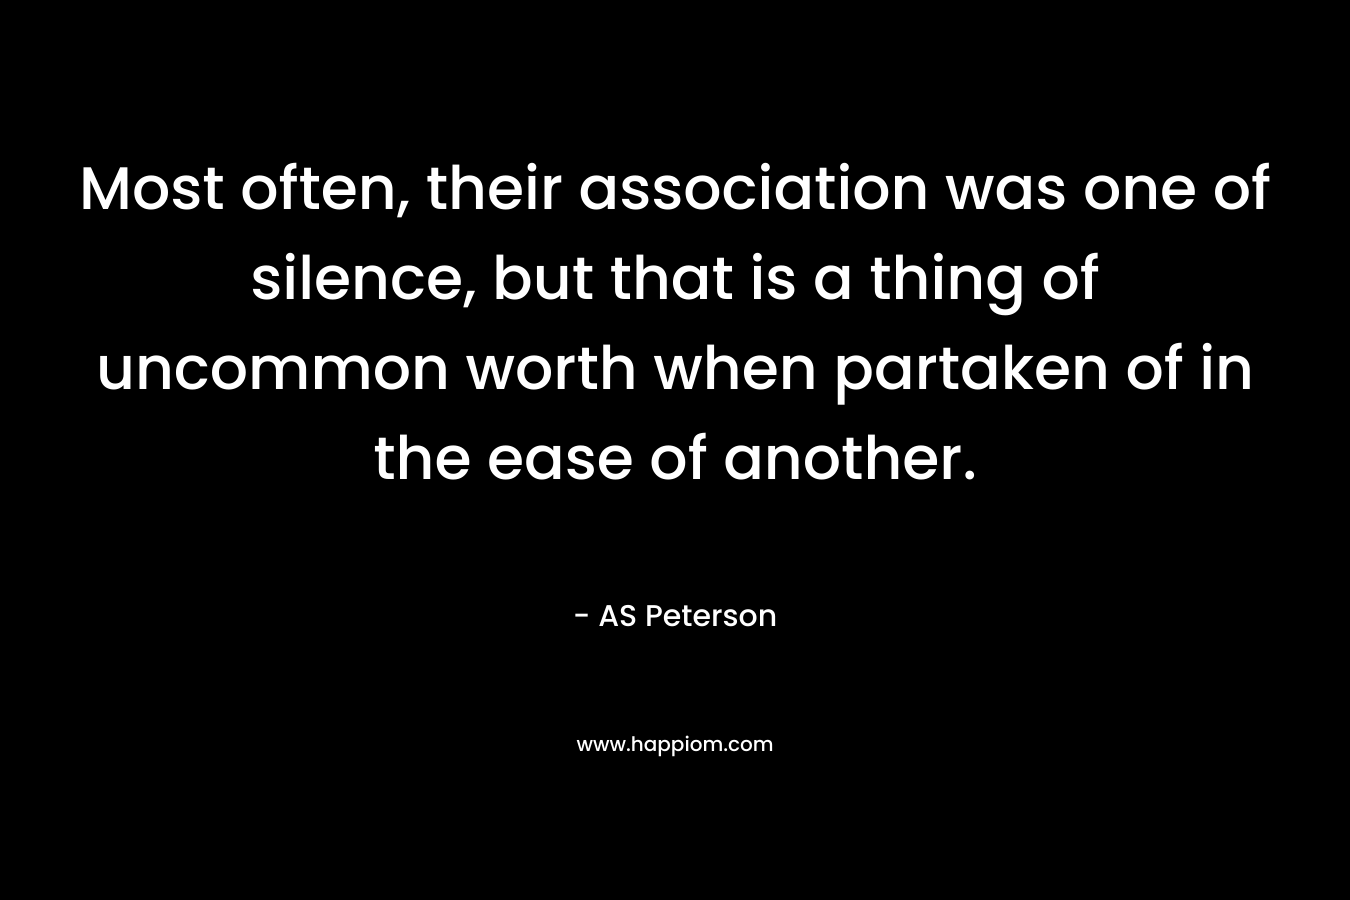 Most often, their association was one of silence, but that is a thing of uncommon worth when partaken of in the ease of another. – AS Peterson